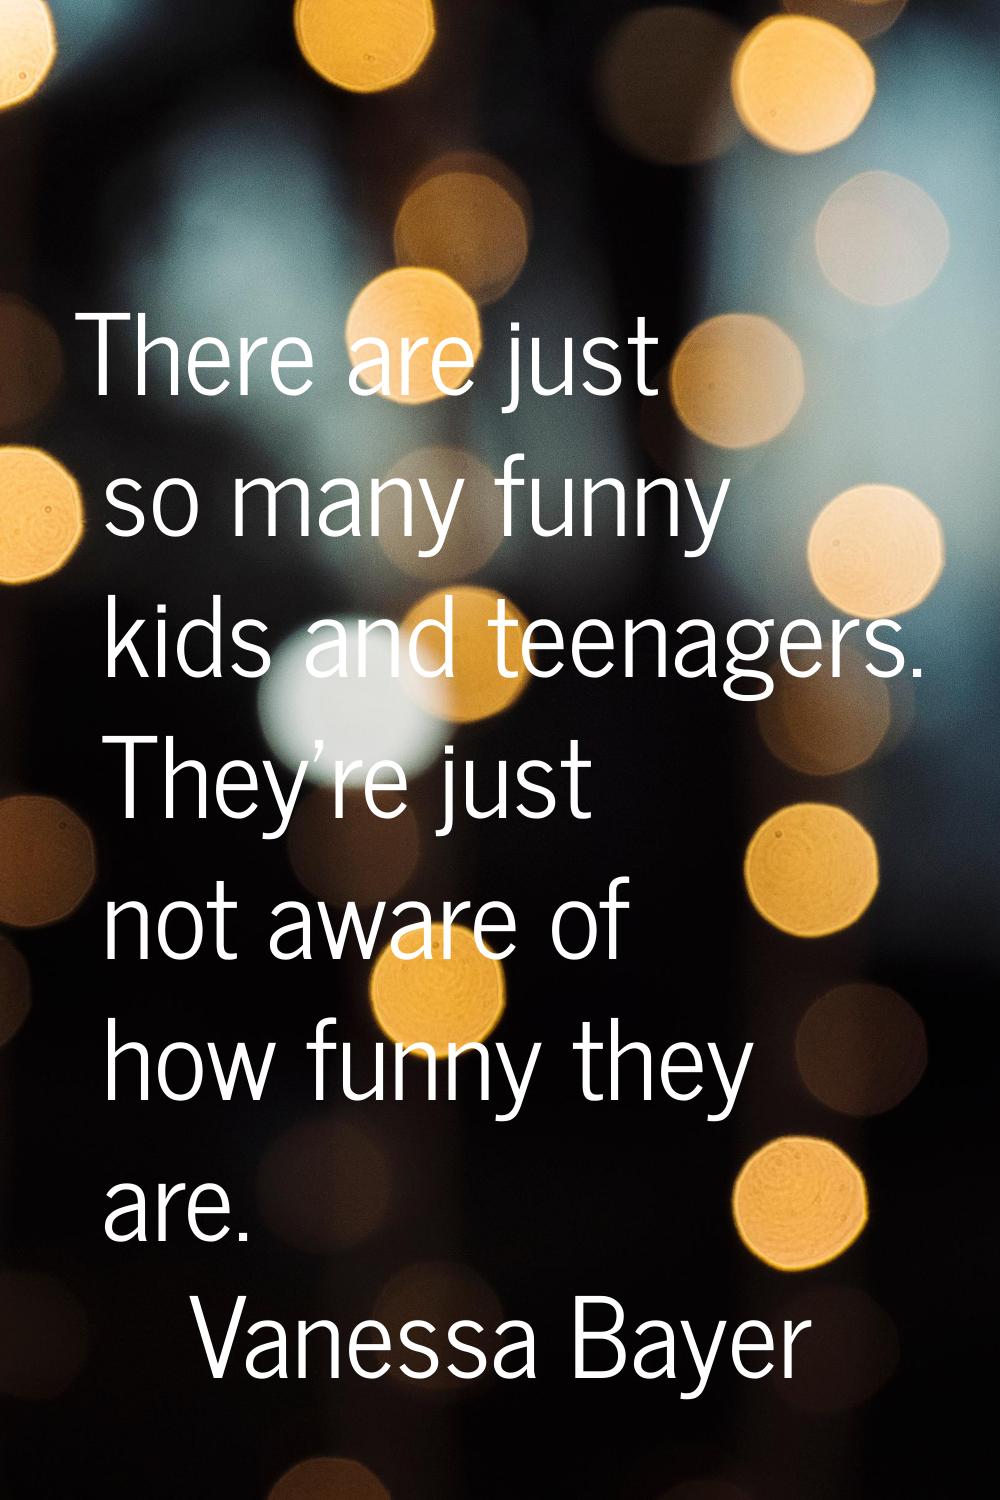 There are just so many funny kids and teenagers. They're just not aware of how funny they are.